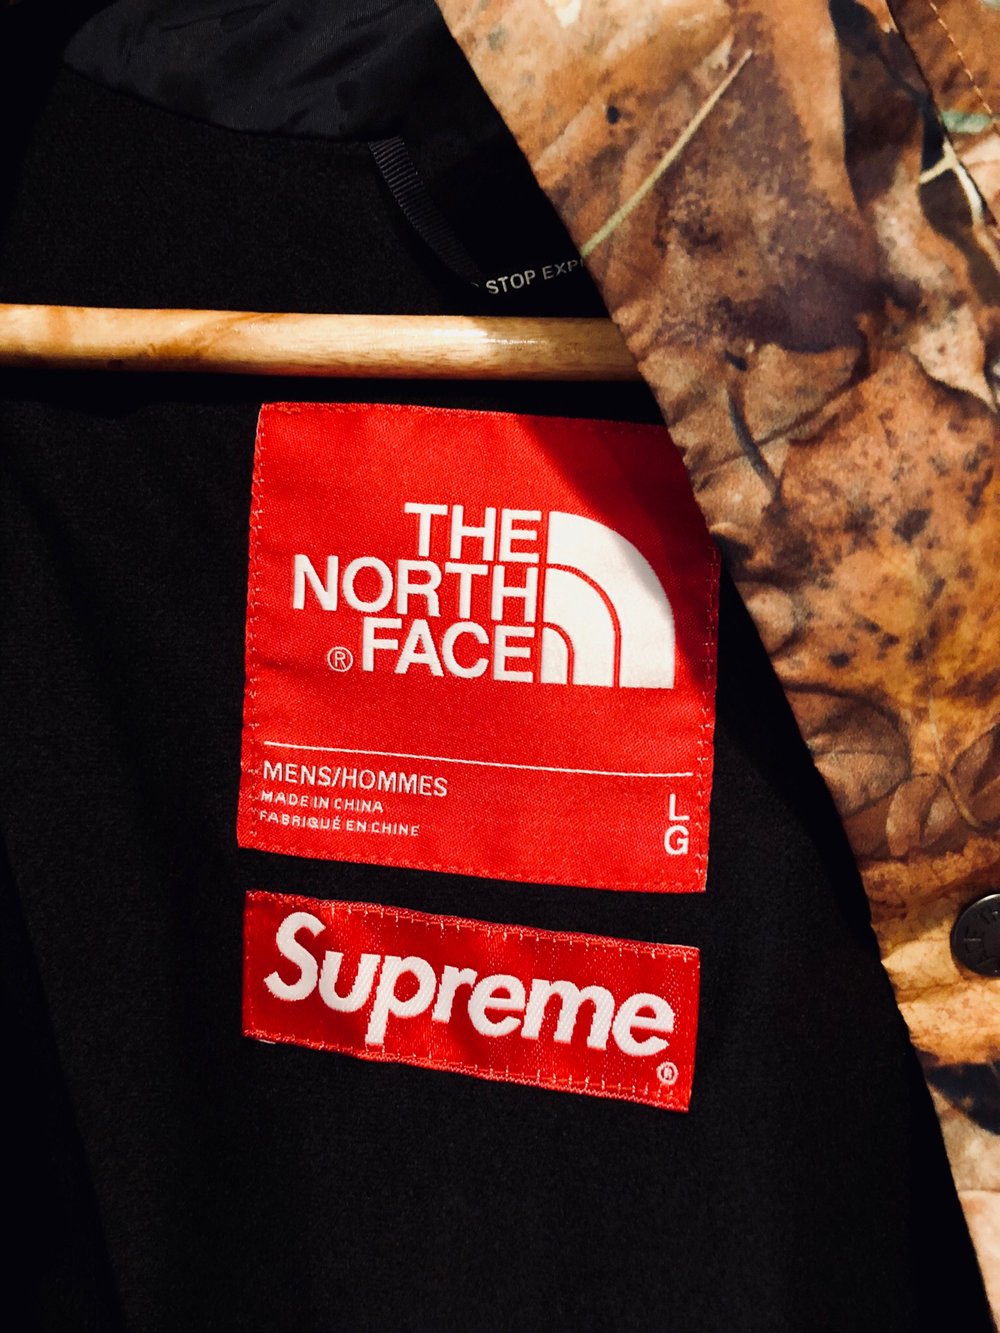 Supreme®️ x The North Face®️ - Mountain Light Jacket (Leaves Camo)